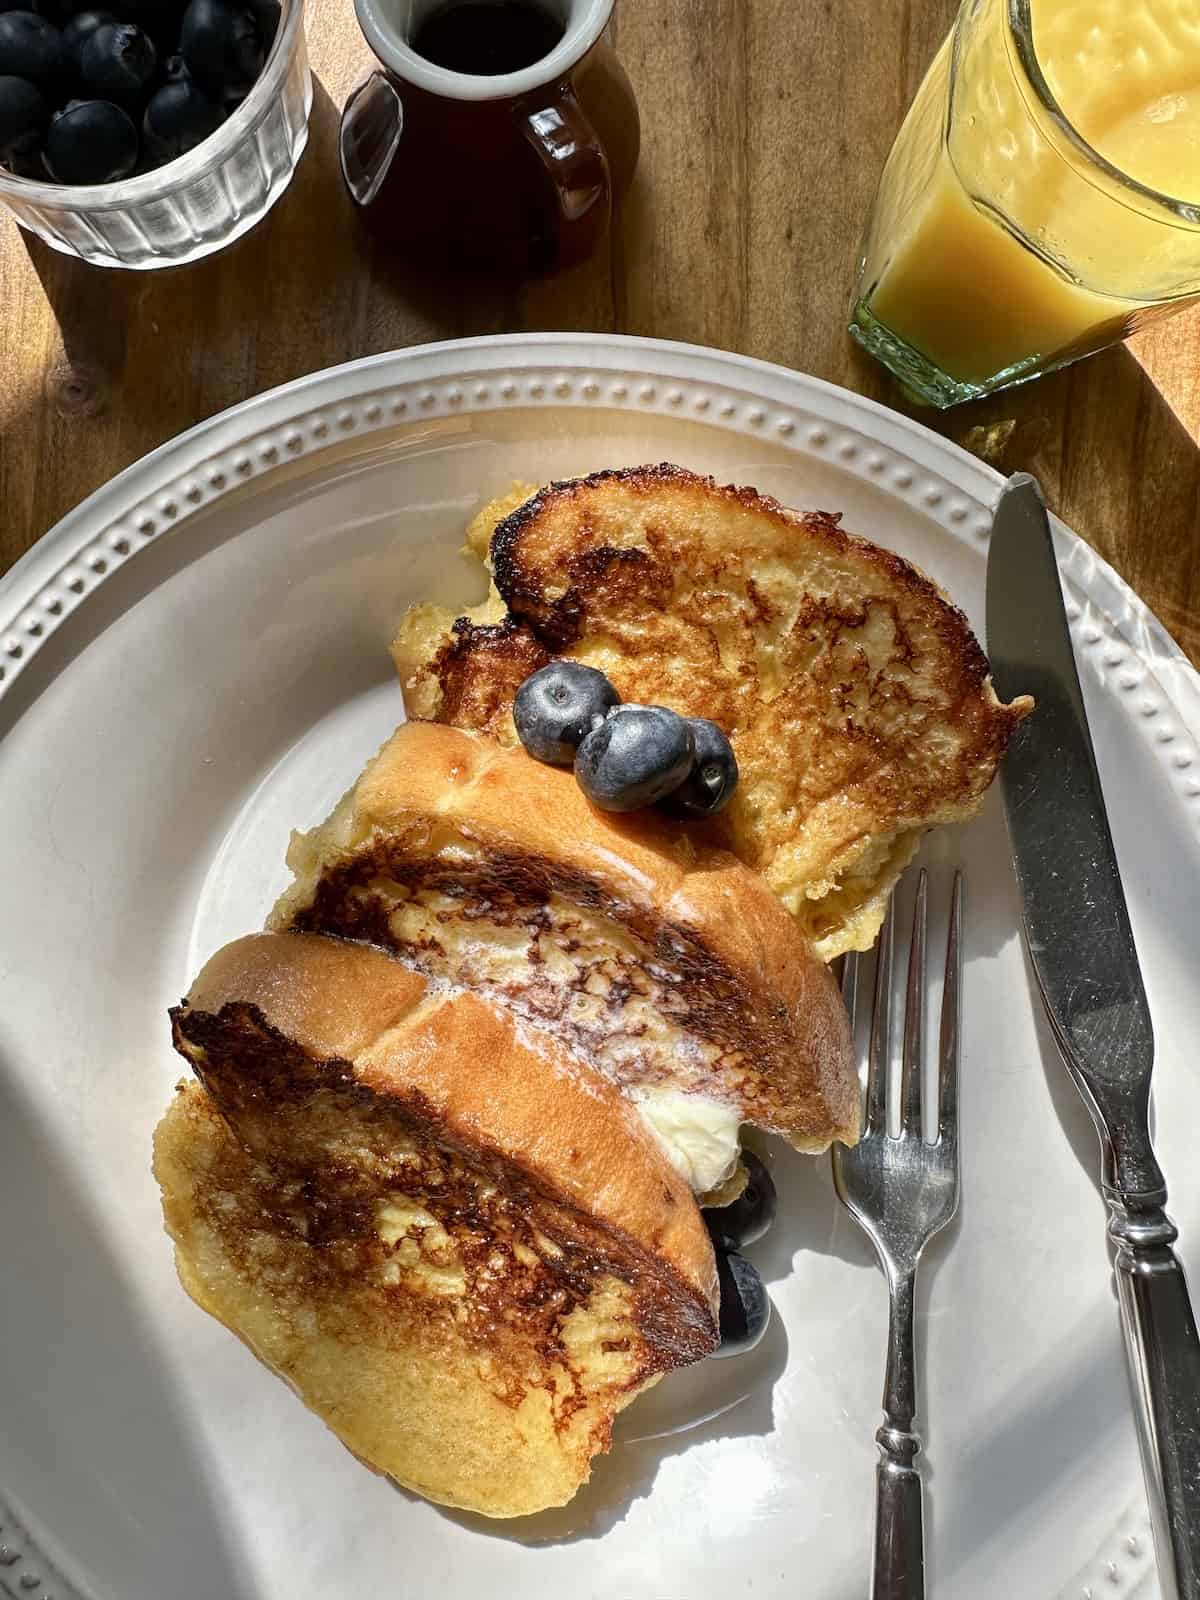 Several slices of french toast on a plate with berries, orange juice and syrup.